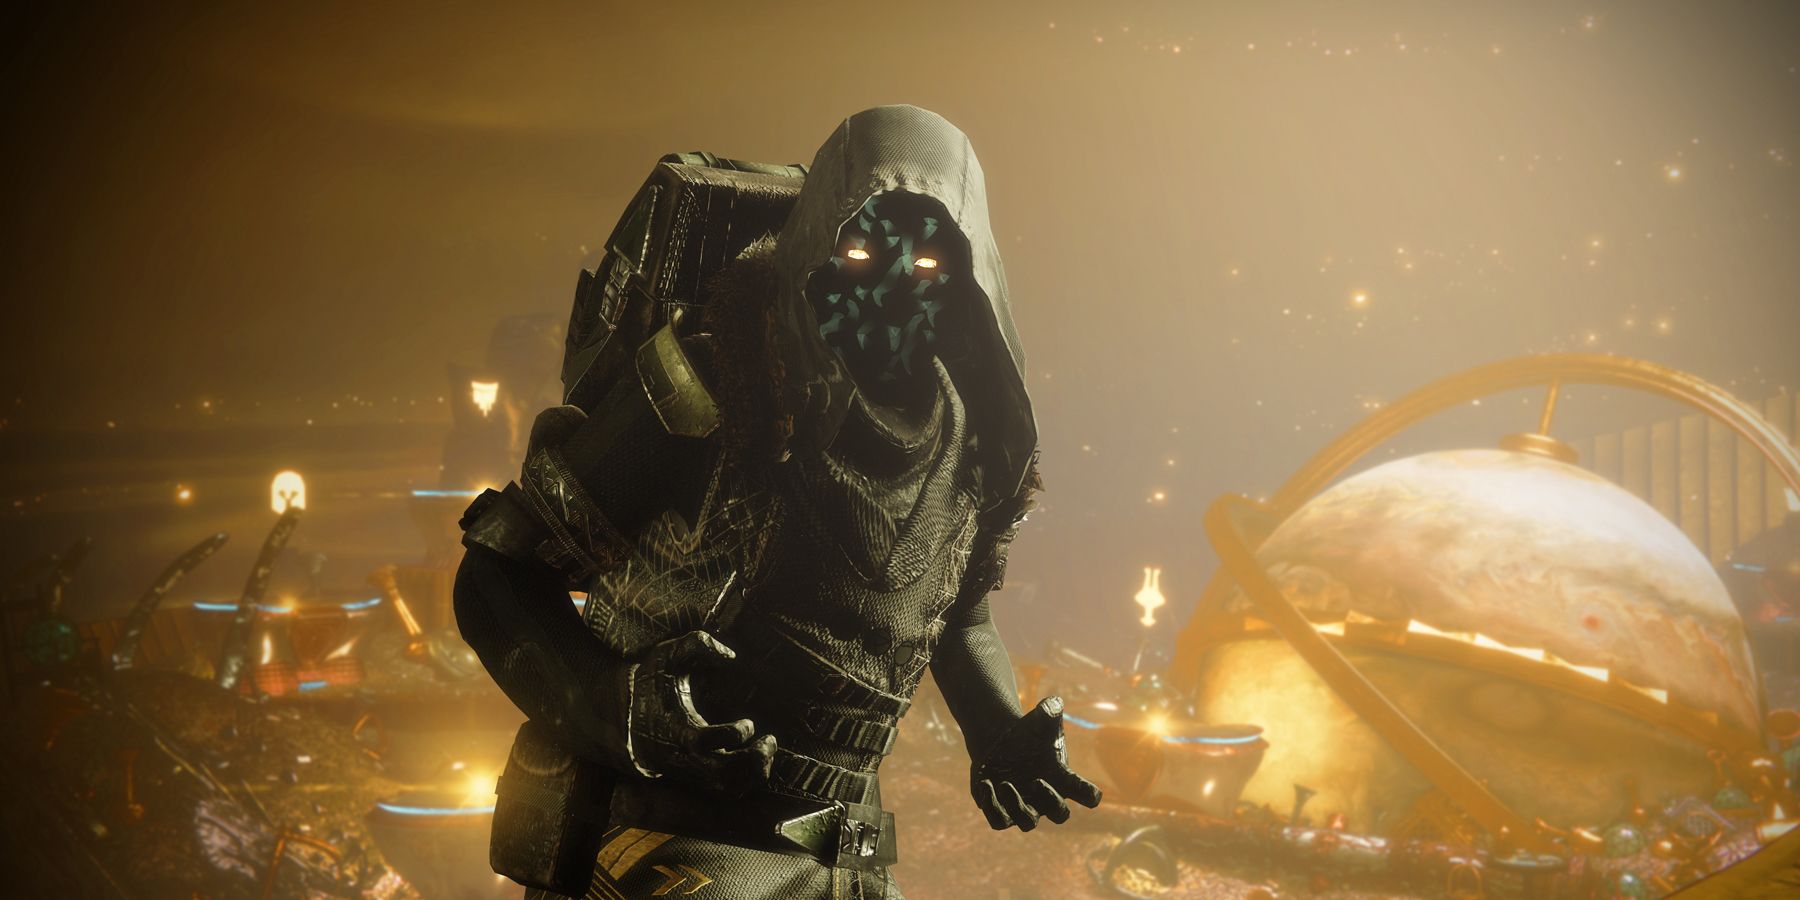 Xur with his treasure from Destiny 2.